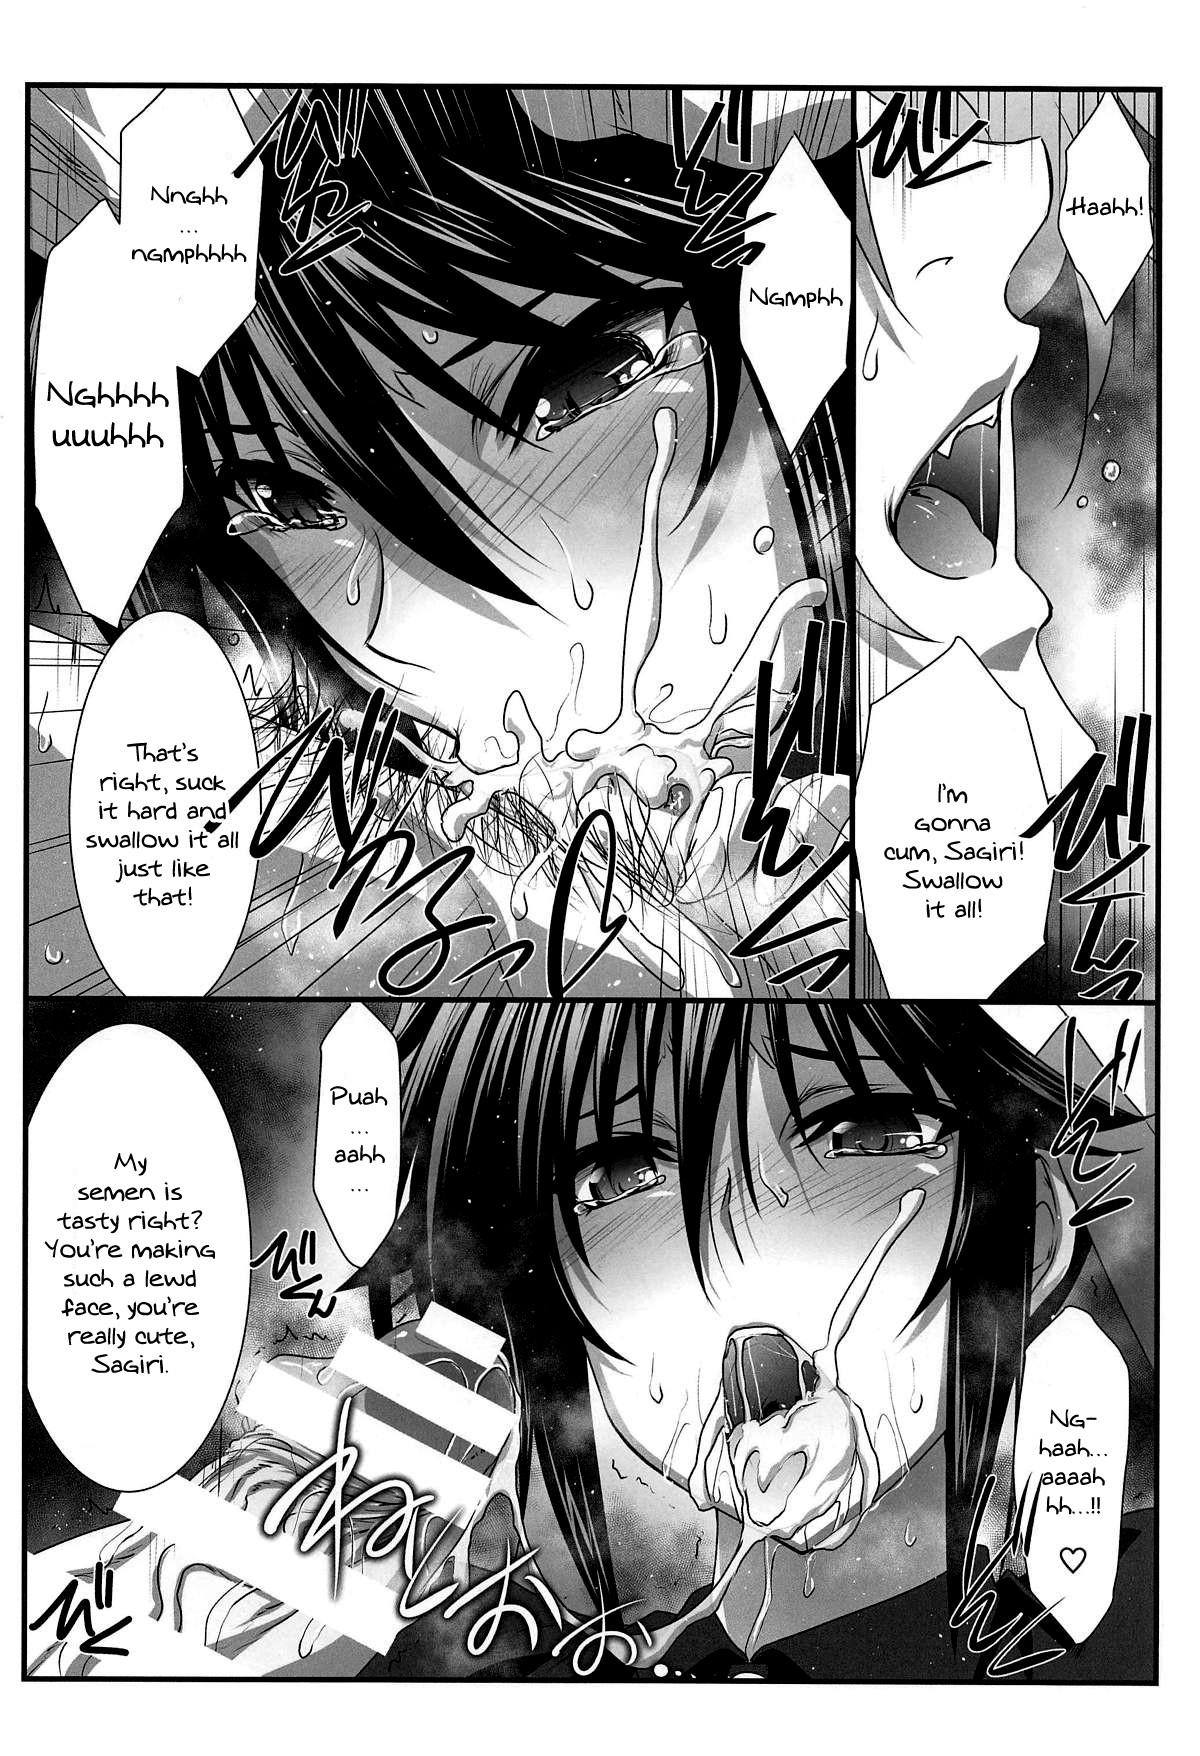 For Astral Bout Ver. 39 - Yuragisou no yuuna-san Assfingering - Page 9